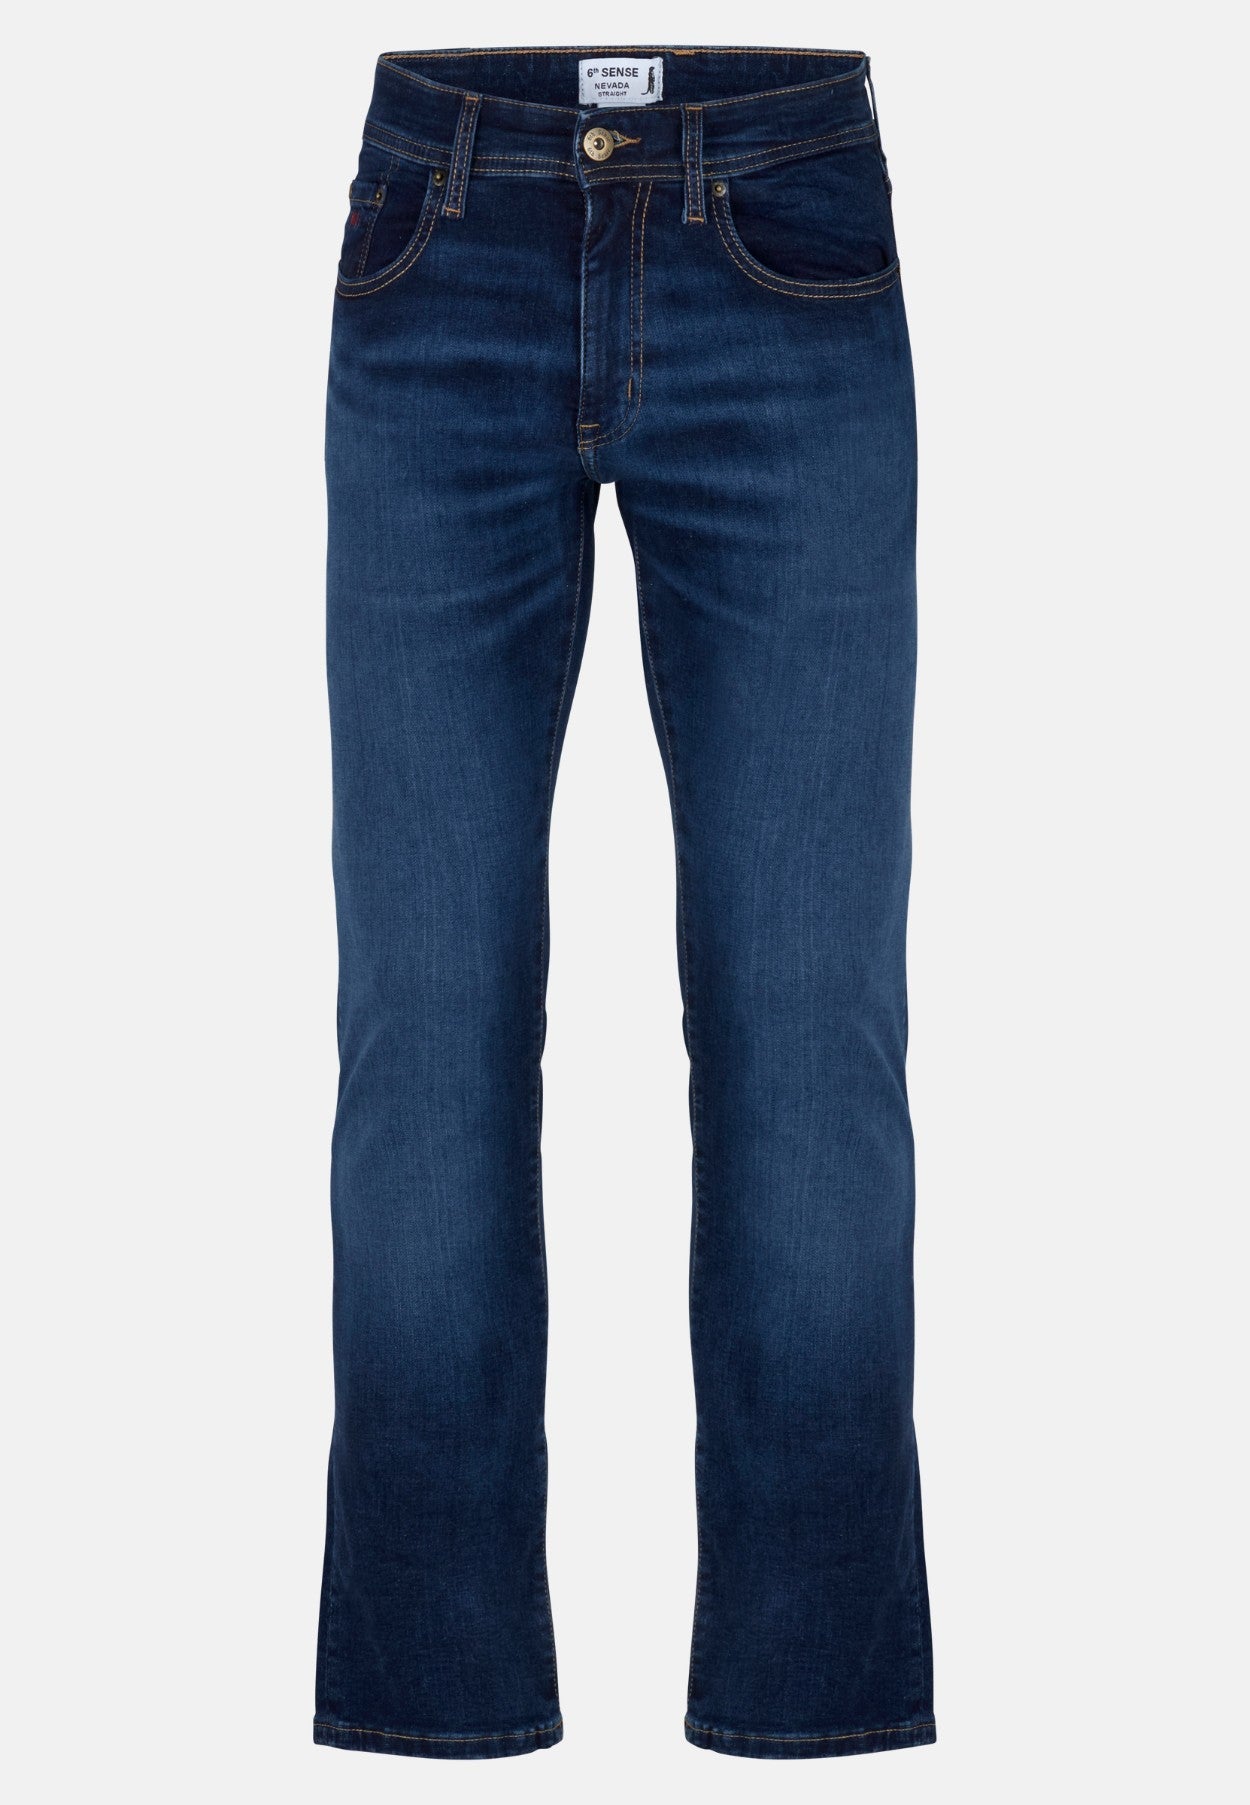 Nevada French Navy Tapered Fit Jean